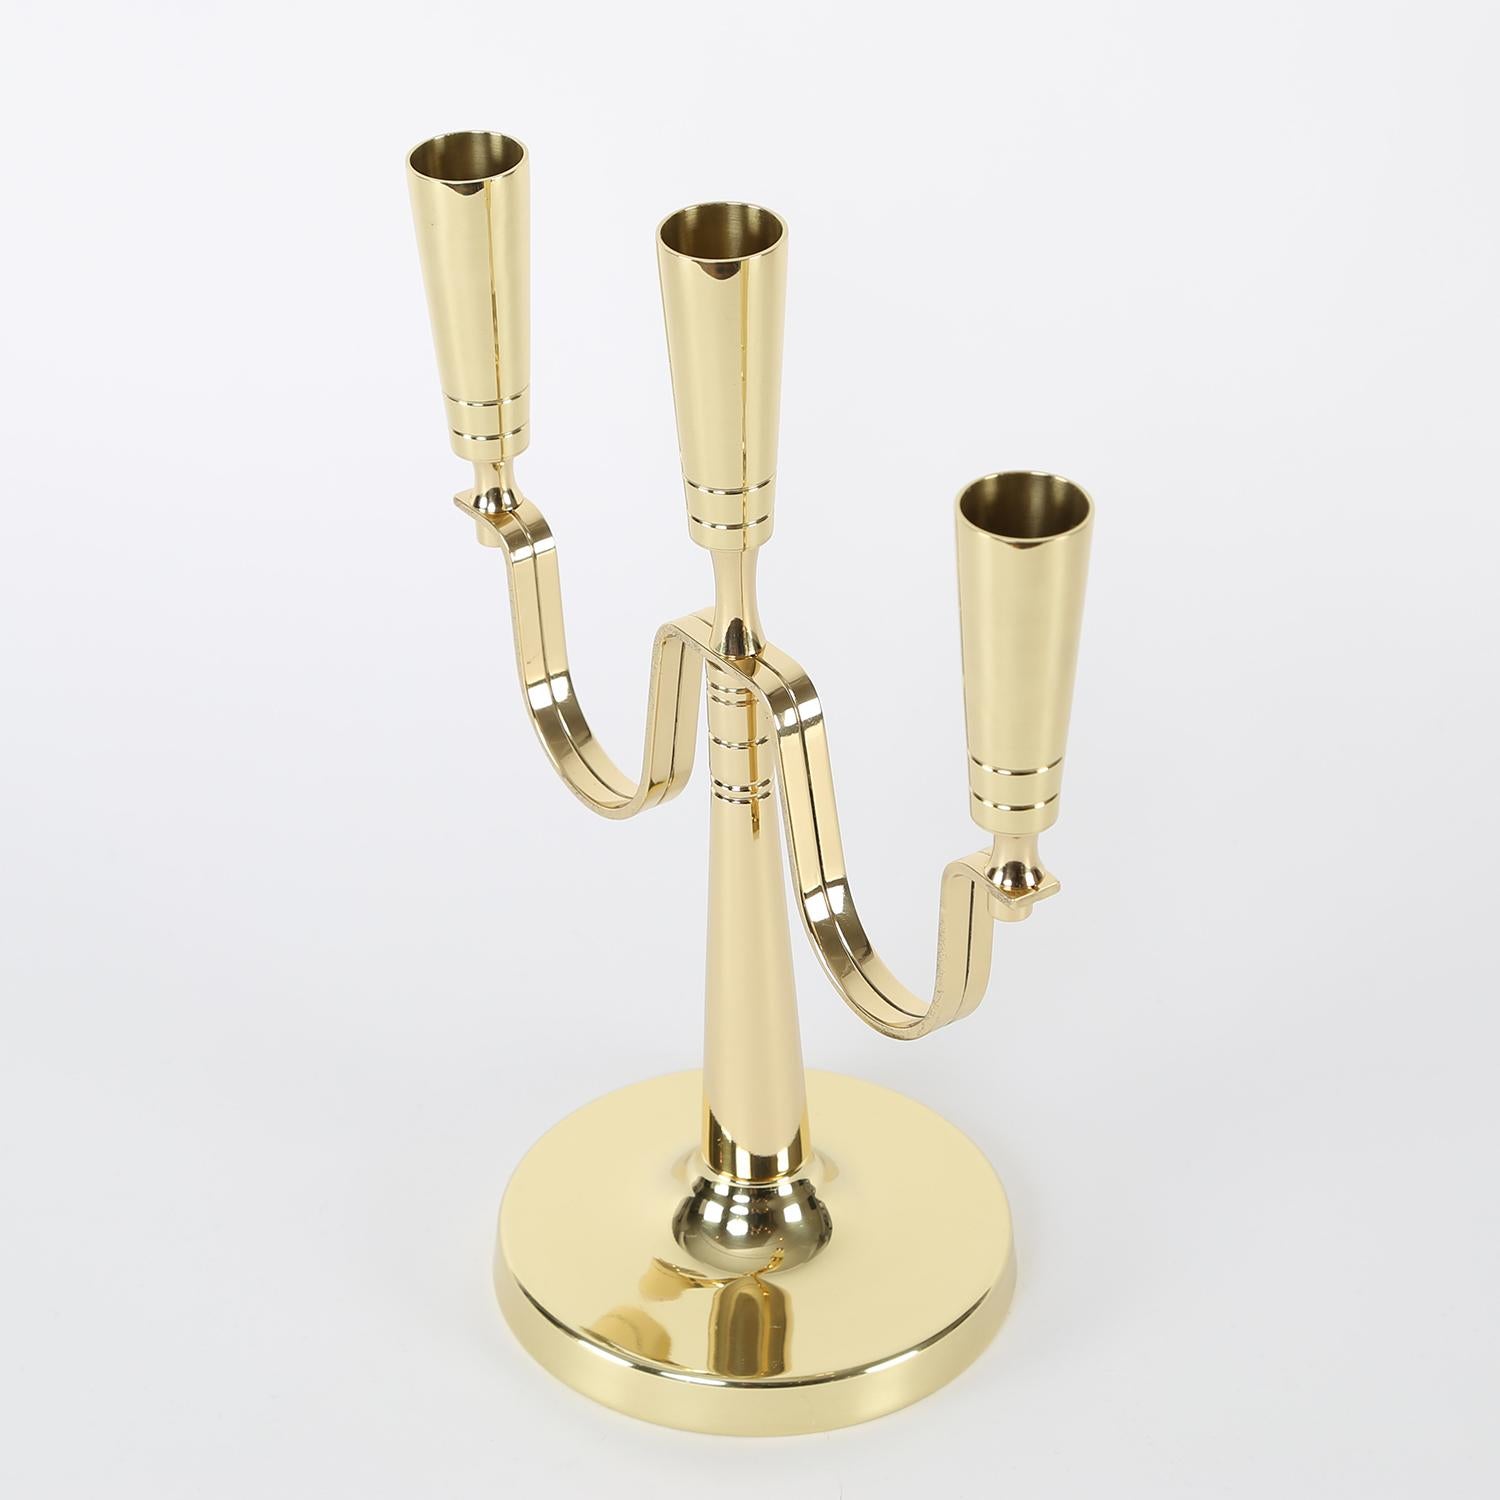 Elegant engraved candelabrum in polished brass holding 3 candles by Tommi Parzinger for Dorlyn Silversmiths, American 1950's.